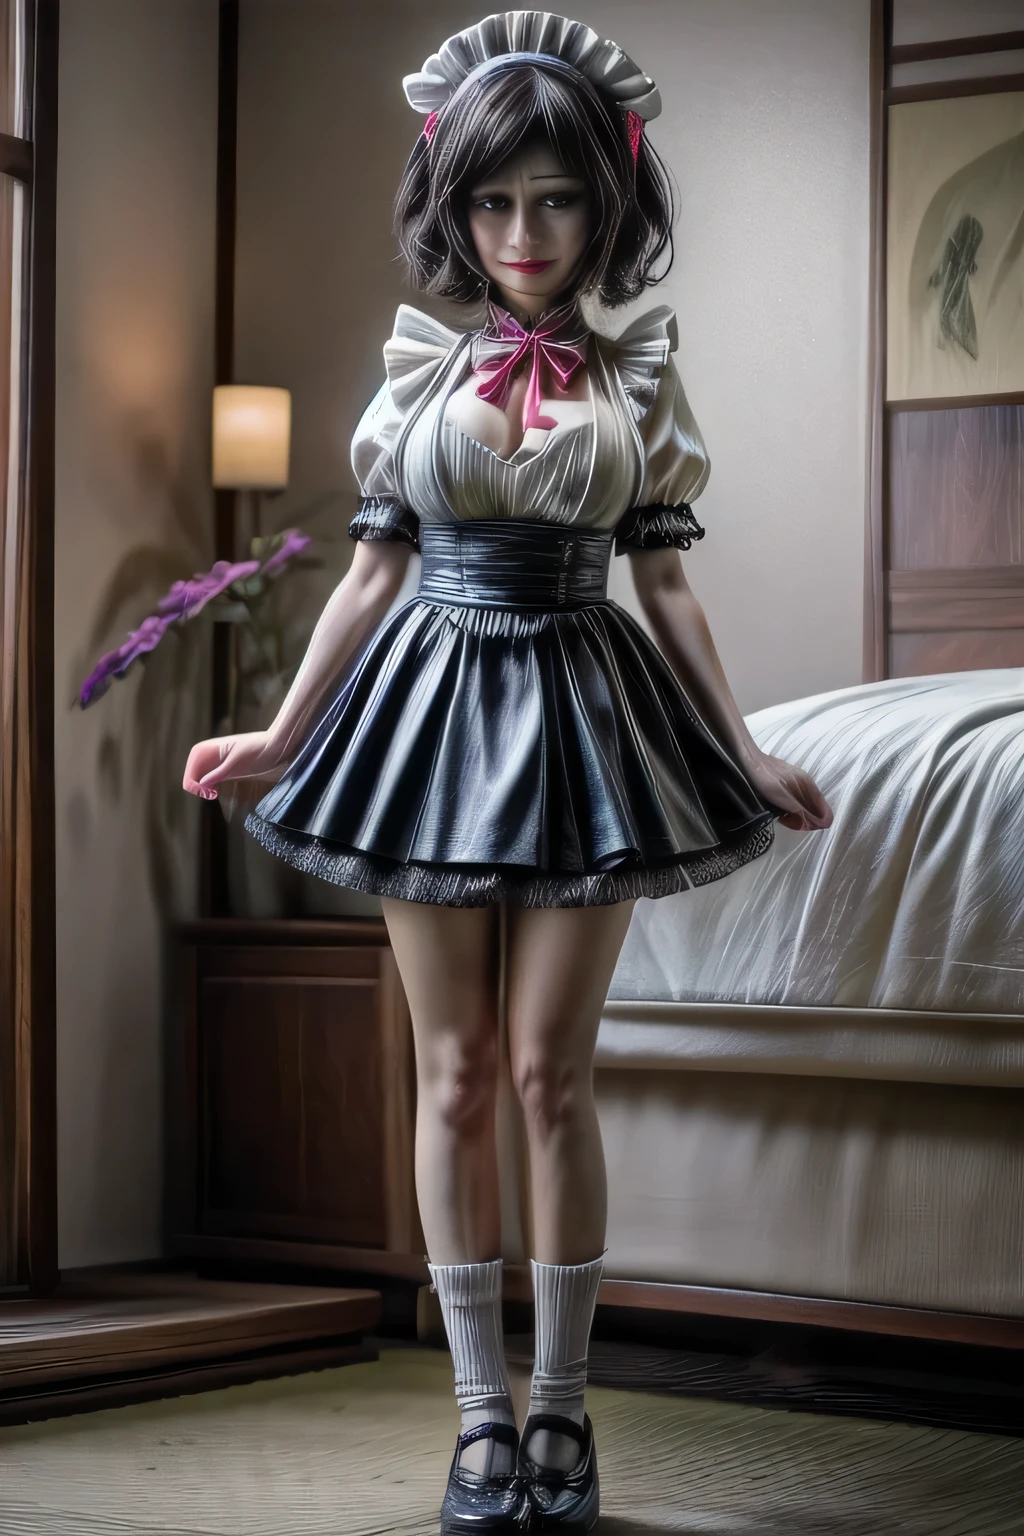 japanese milf wearing Maid Outfit, standing, full body shot